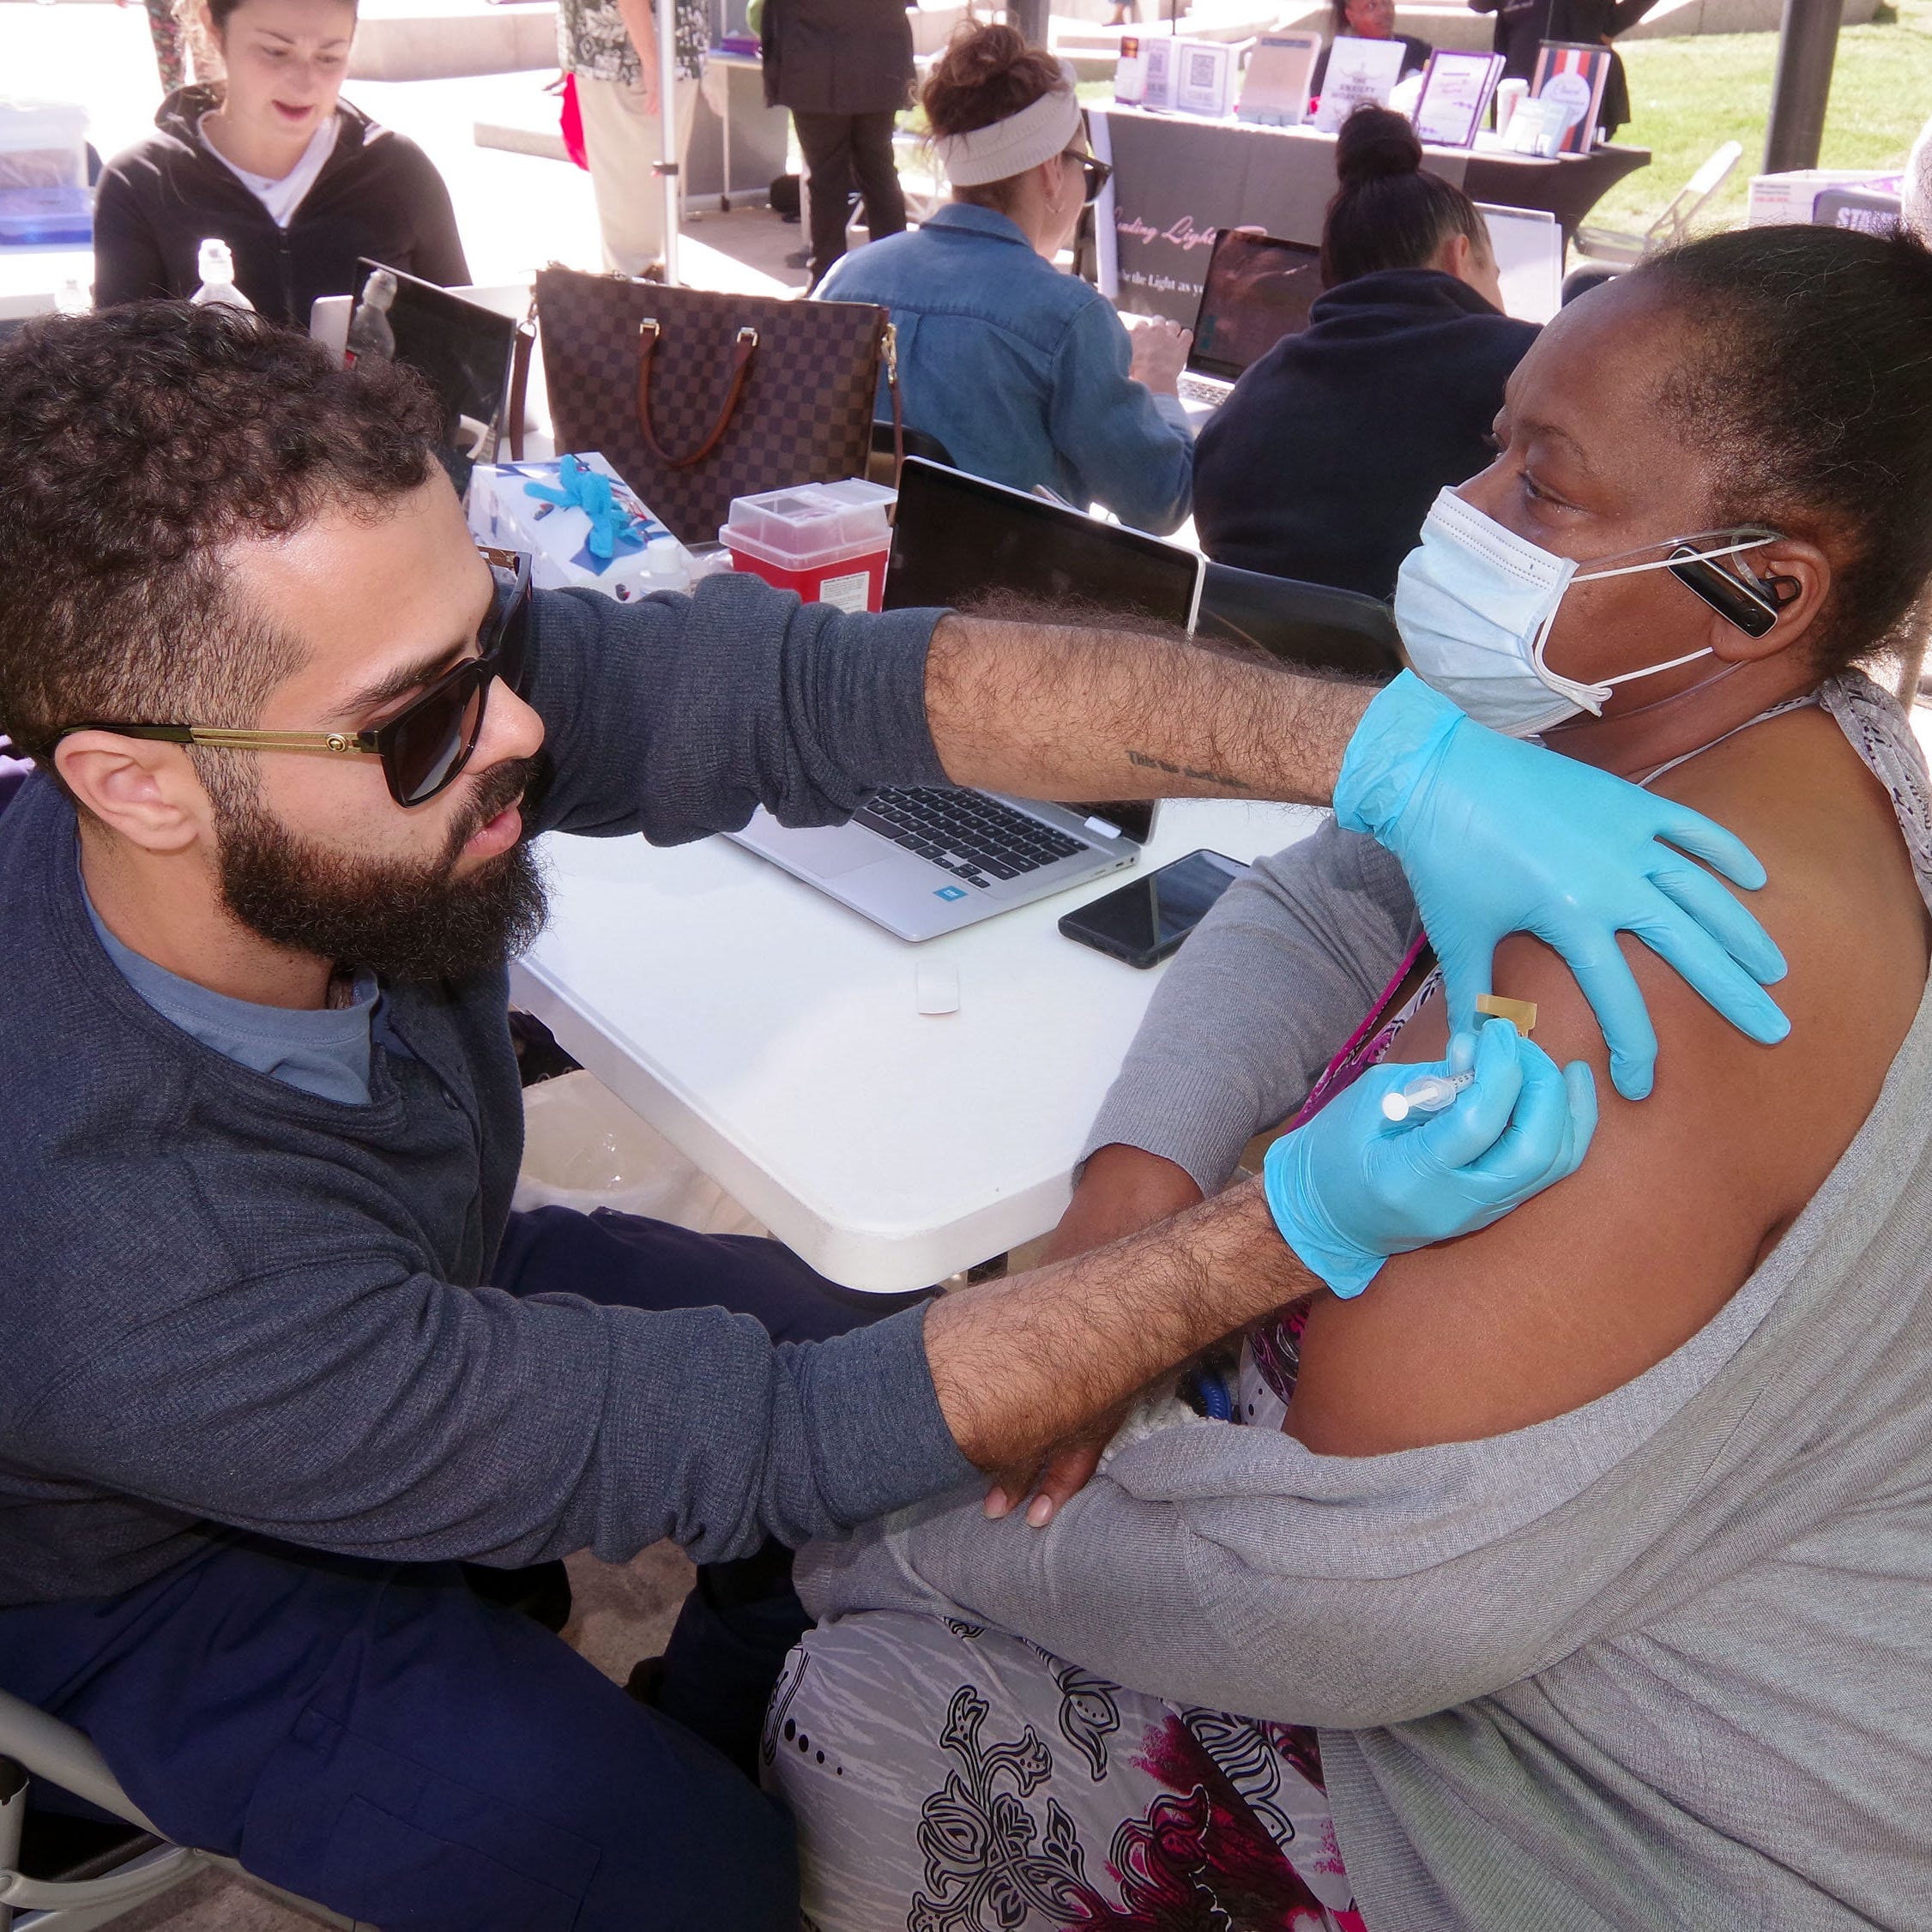 Forristean Gomes of Brockton, Massachusetts, gets a COVID-19 vaccine booster shot from a staff medical technician from East Coast Clinical Health Center. The vaccination came during 1st Responders Appreciation Day in Brockton on Sept. 27.